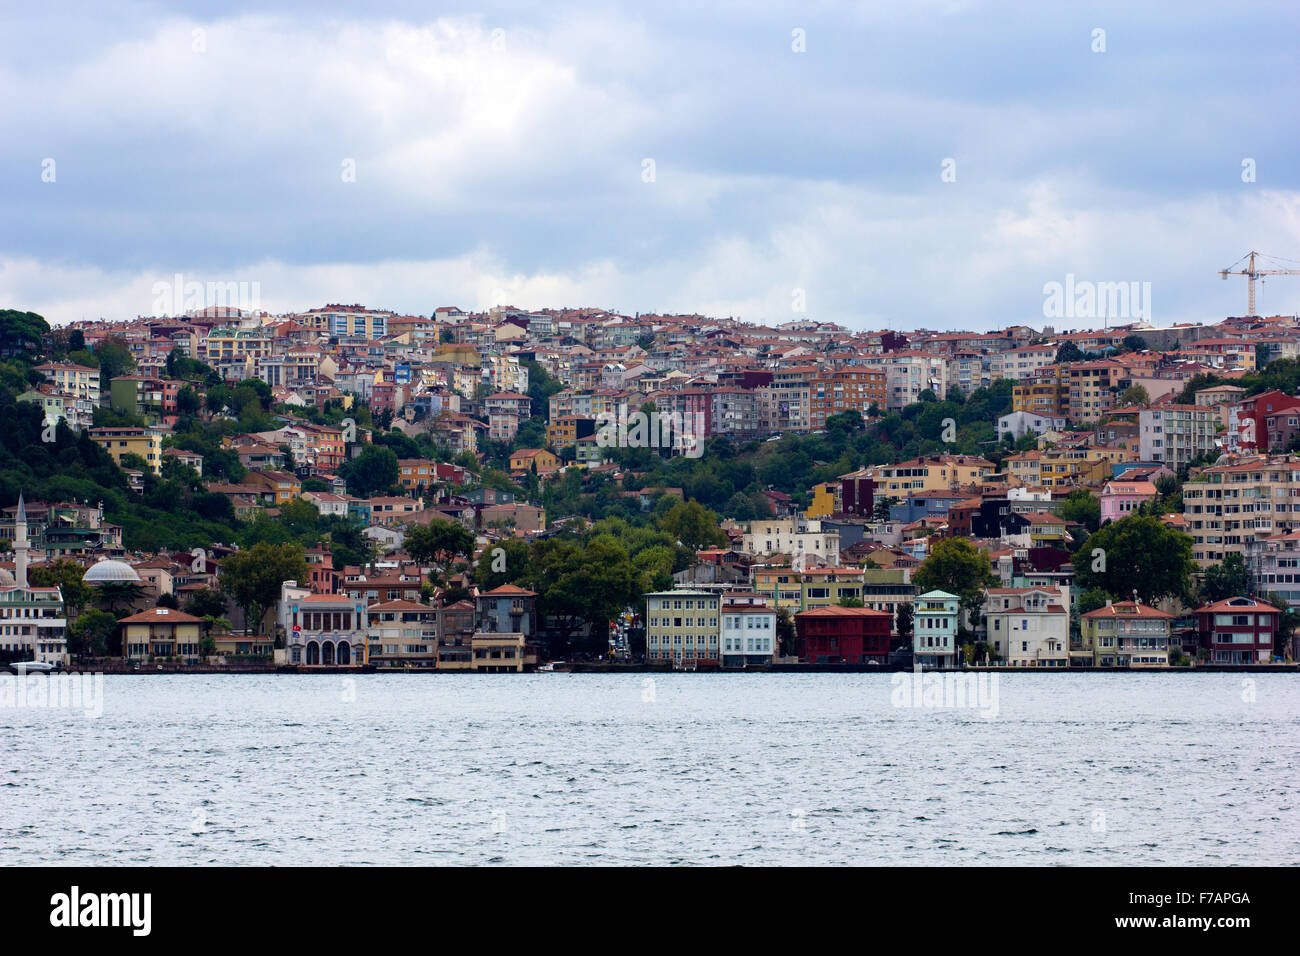 istanbul city scape with crane Stock Photo